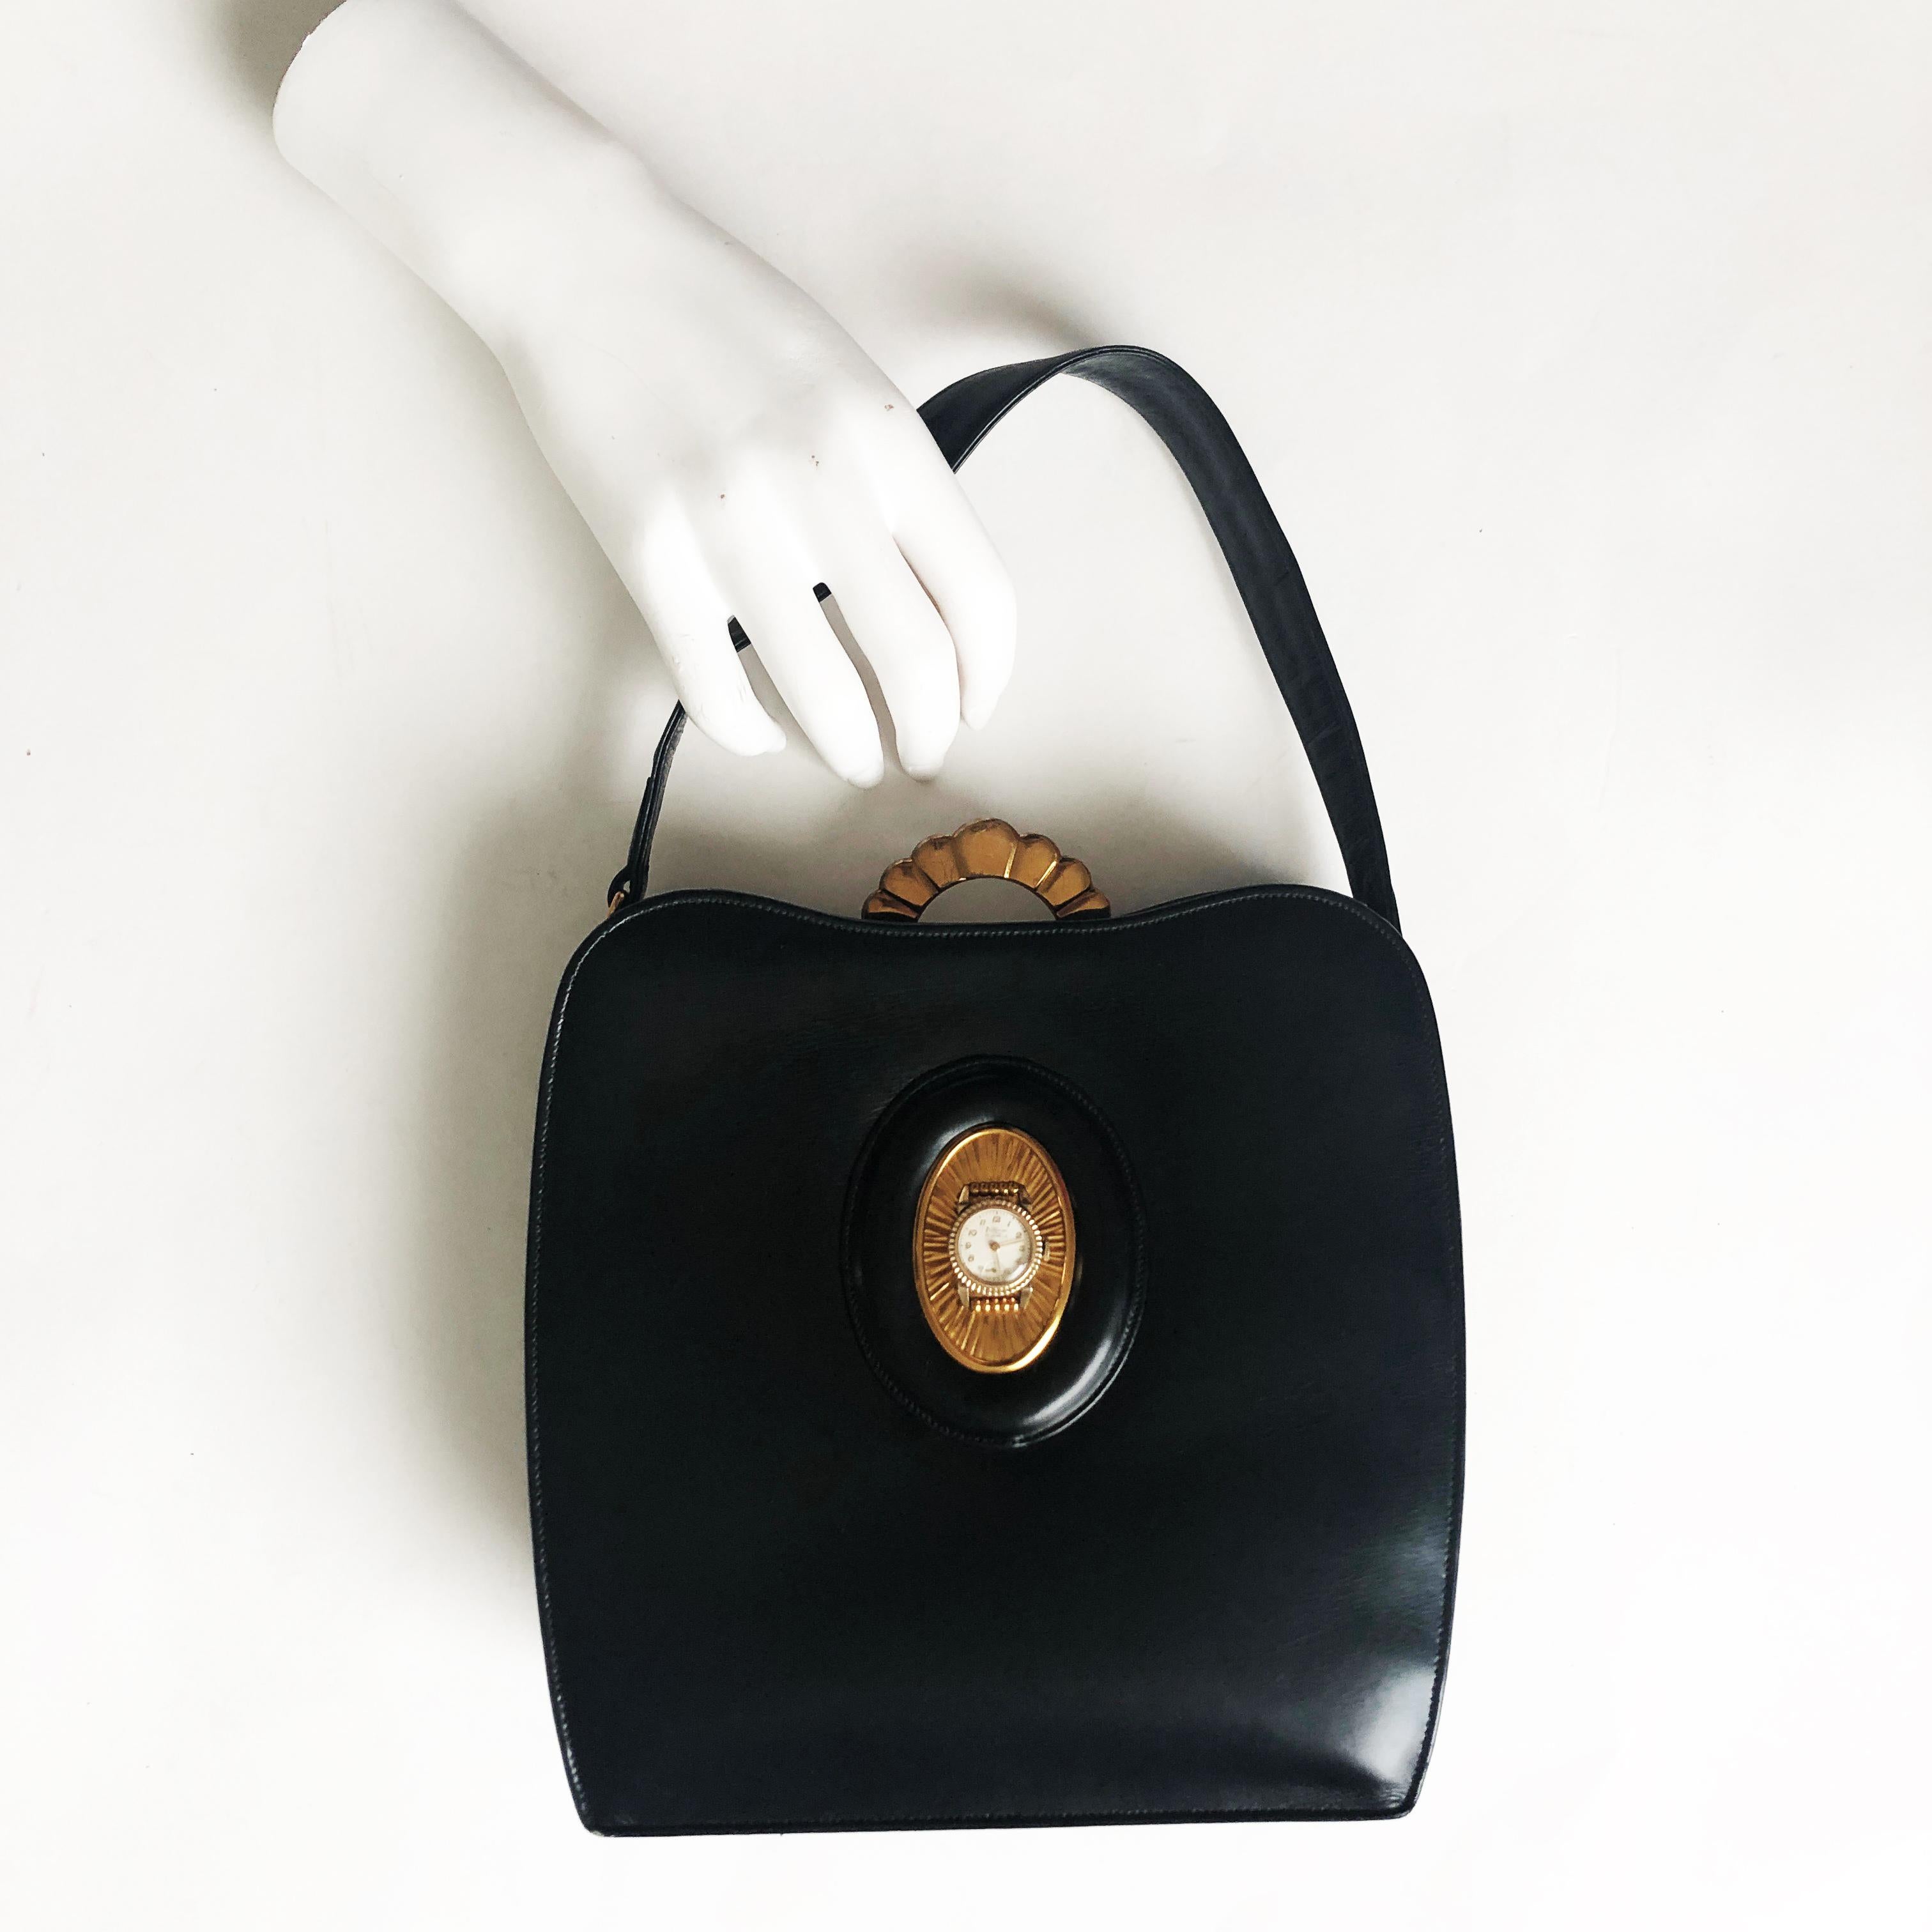 Authentic, preowned, vintage & RARE Evans Elegance black calfskin leather bag w/clock, circa 50s. Comes w/gold mirror compact & attached coin purse. Art Deco metal top closure, hinged, lined in satin w/slit pockets & 1 small open pocket.